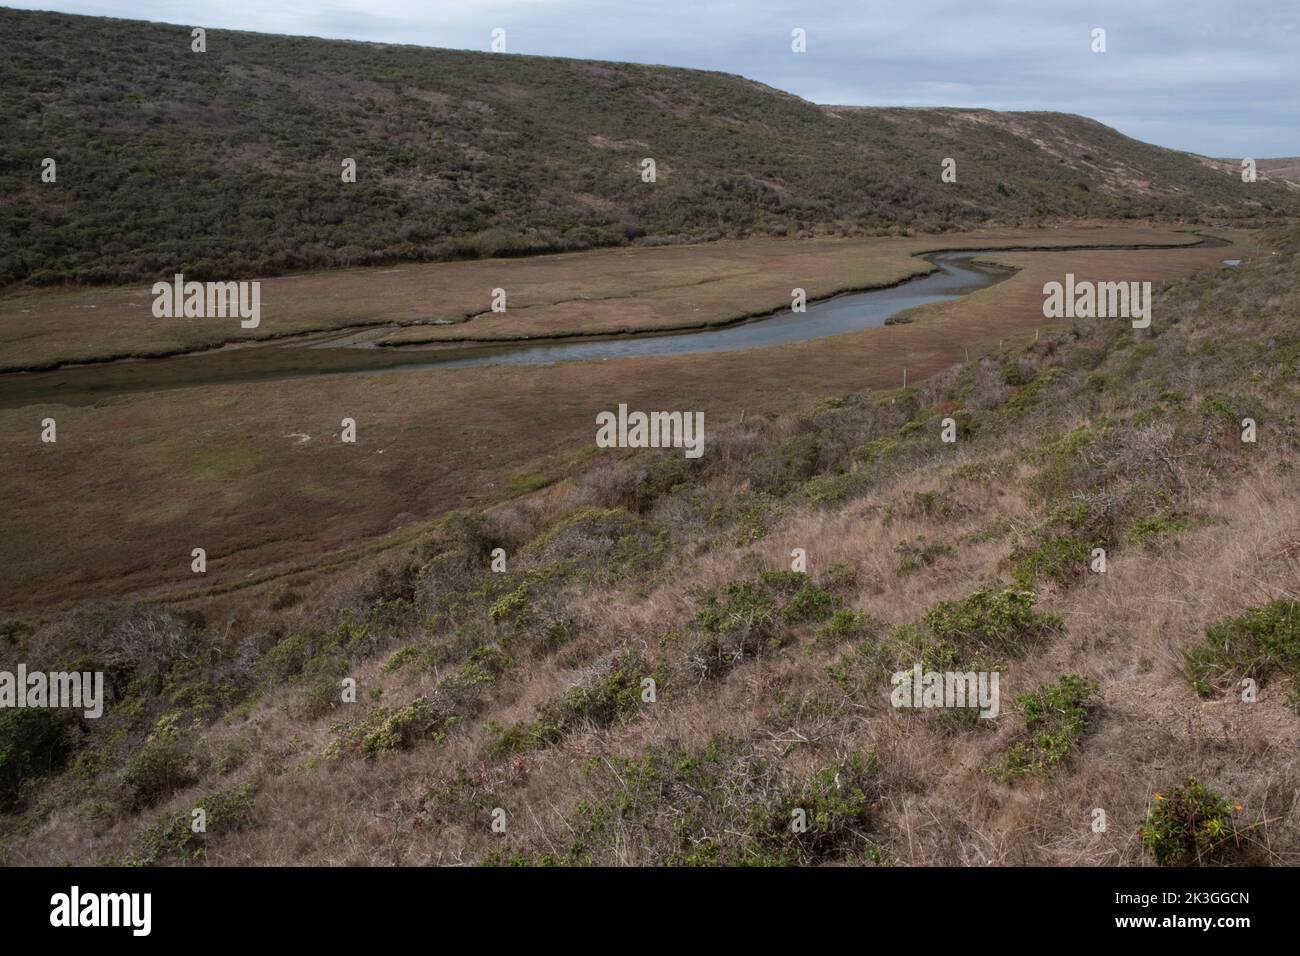 A small river winding through grassy hills on the West coast of North America in California, USA. Stock Photo